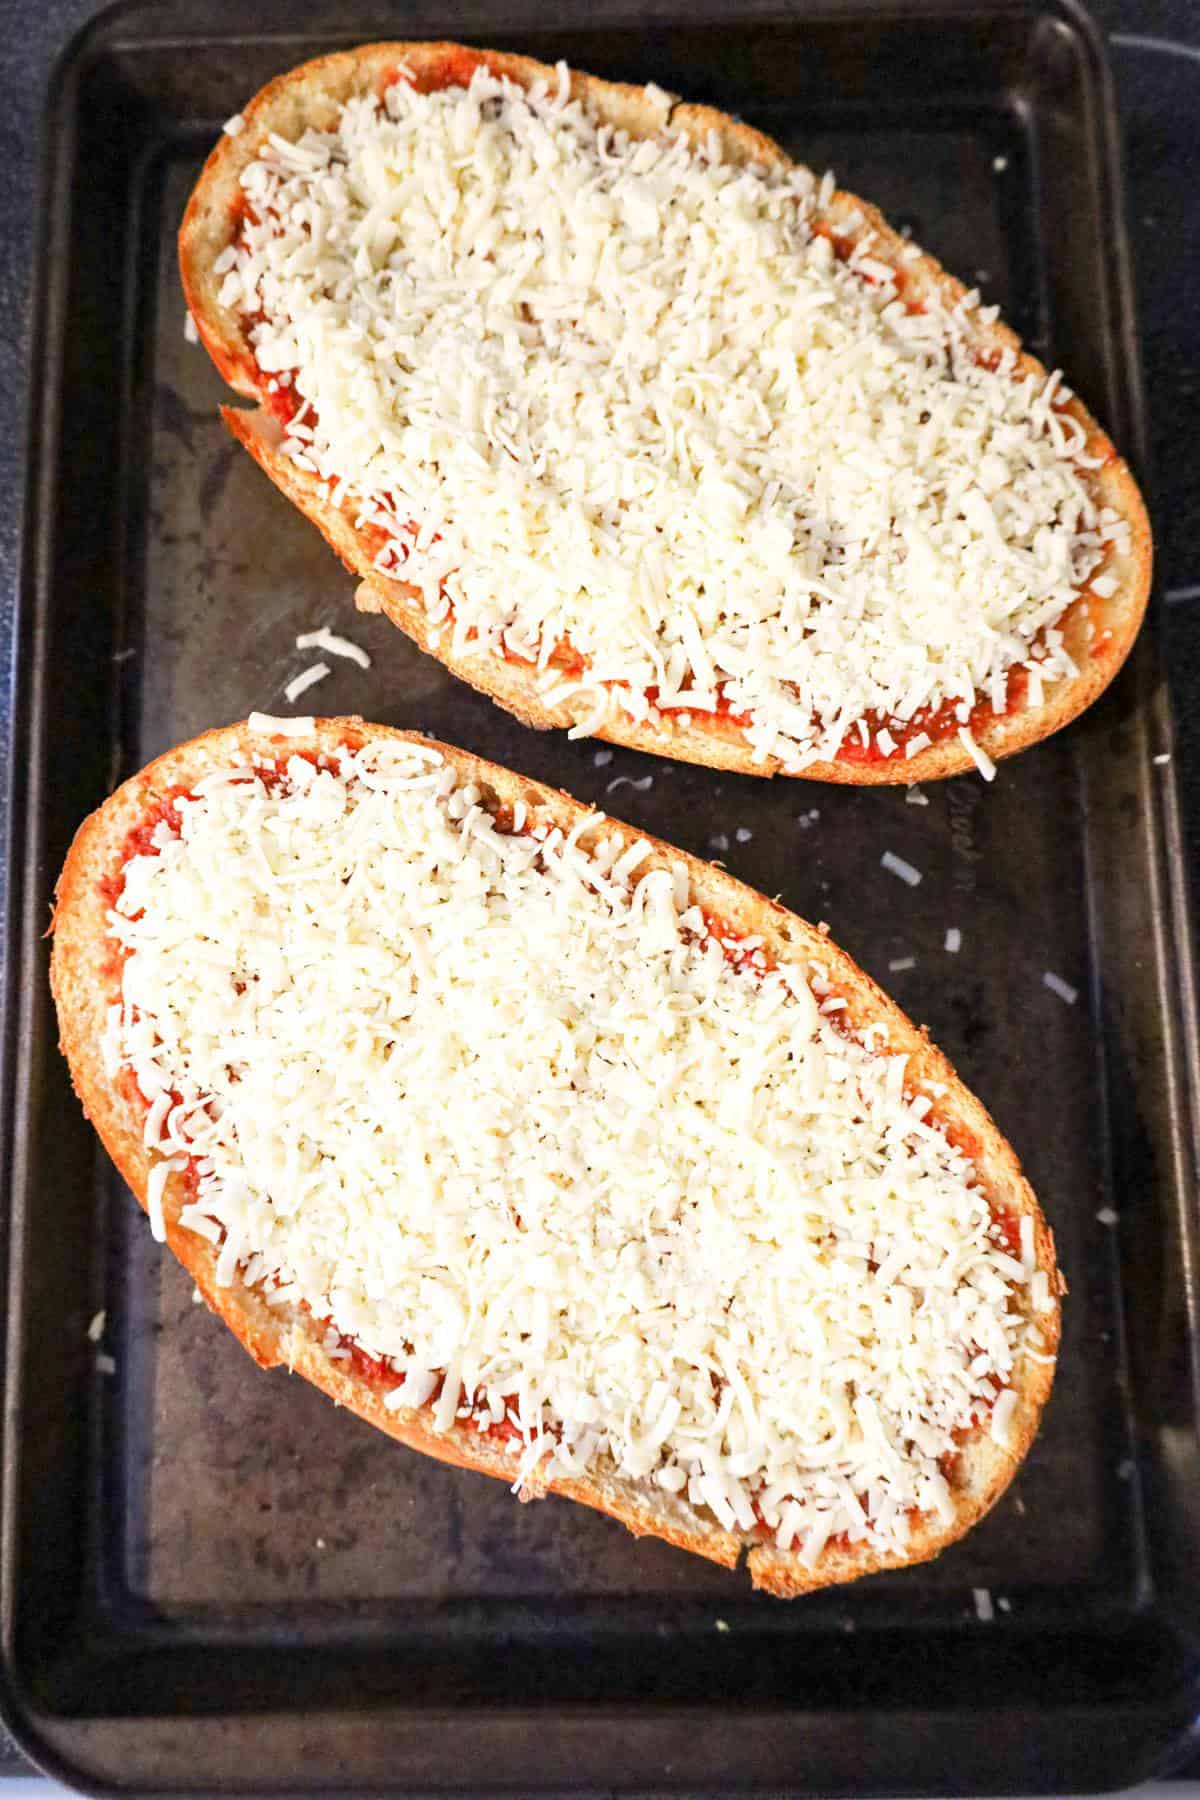 shredded mozzarella and pizza sauce on top of French bread